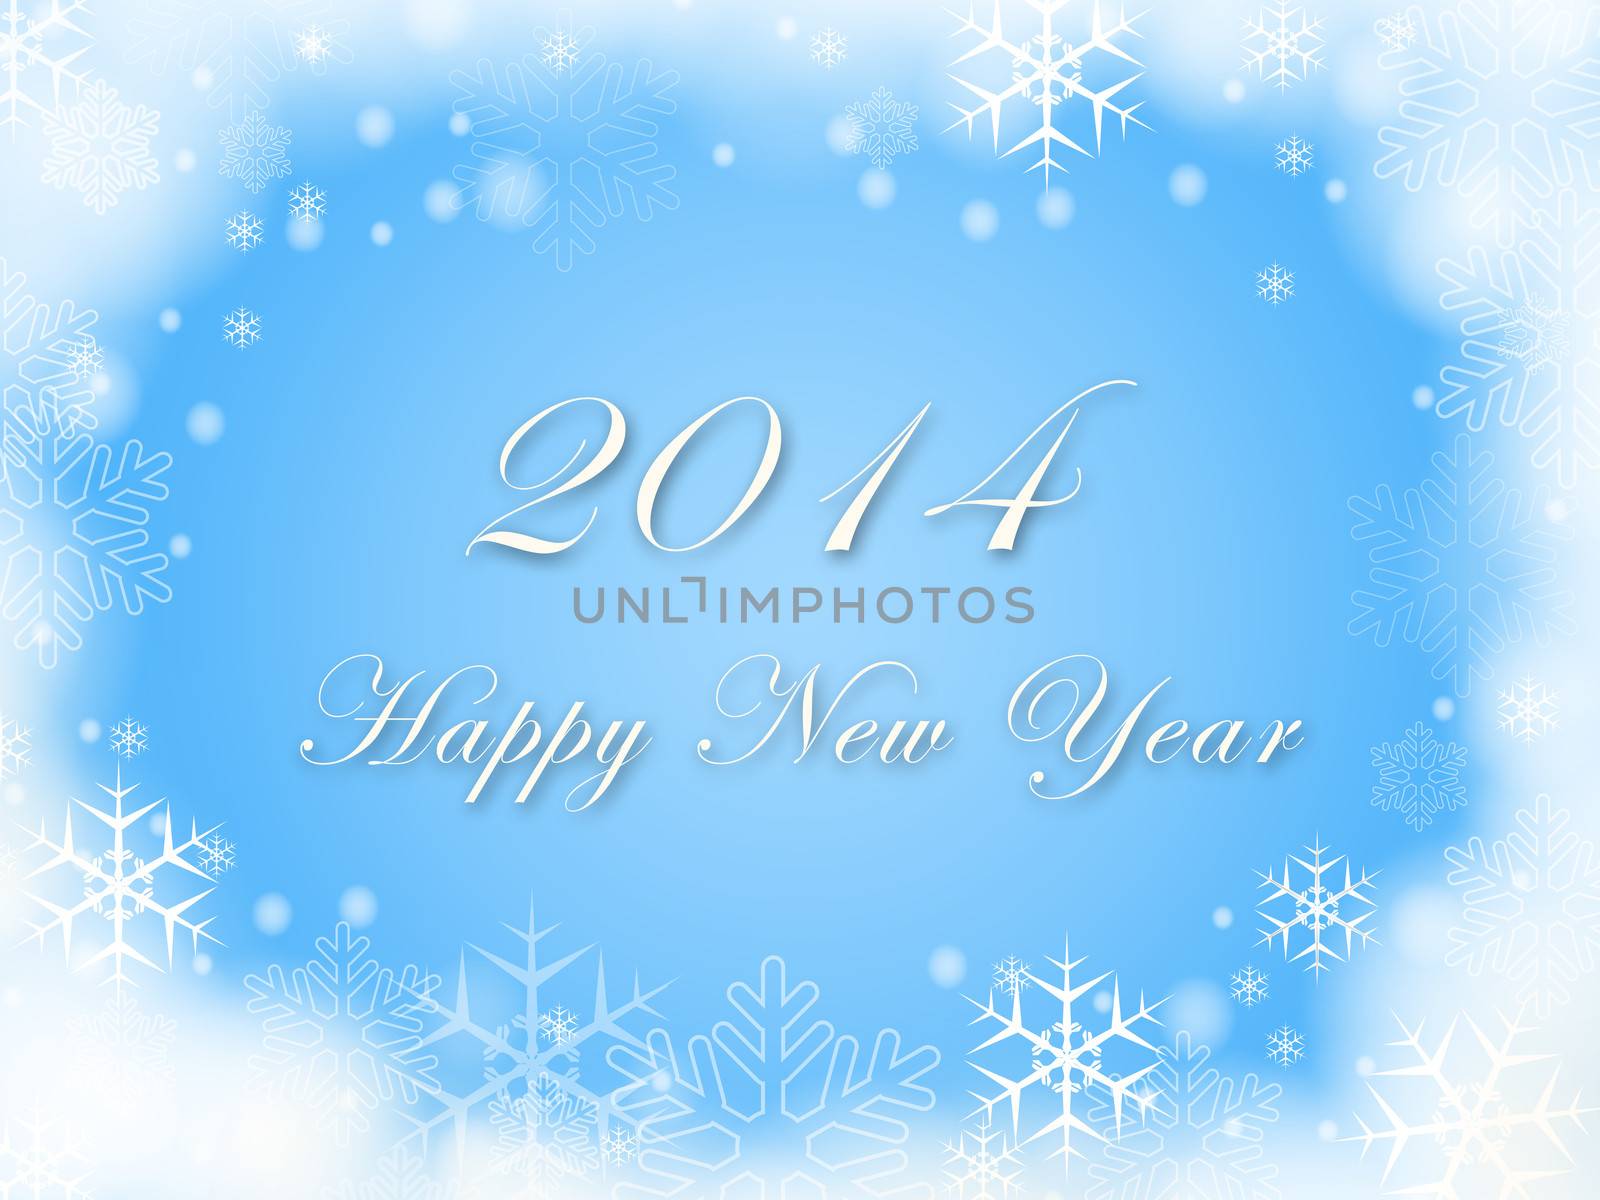 Happy New Year 2014 - text over blue background with snowflakes